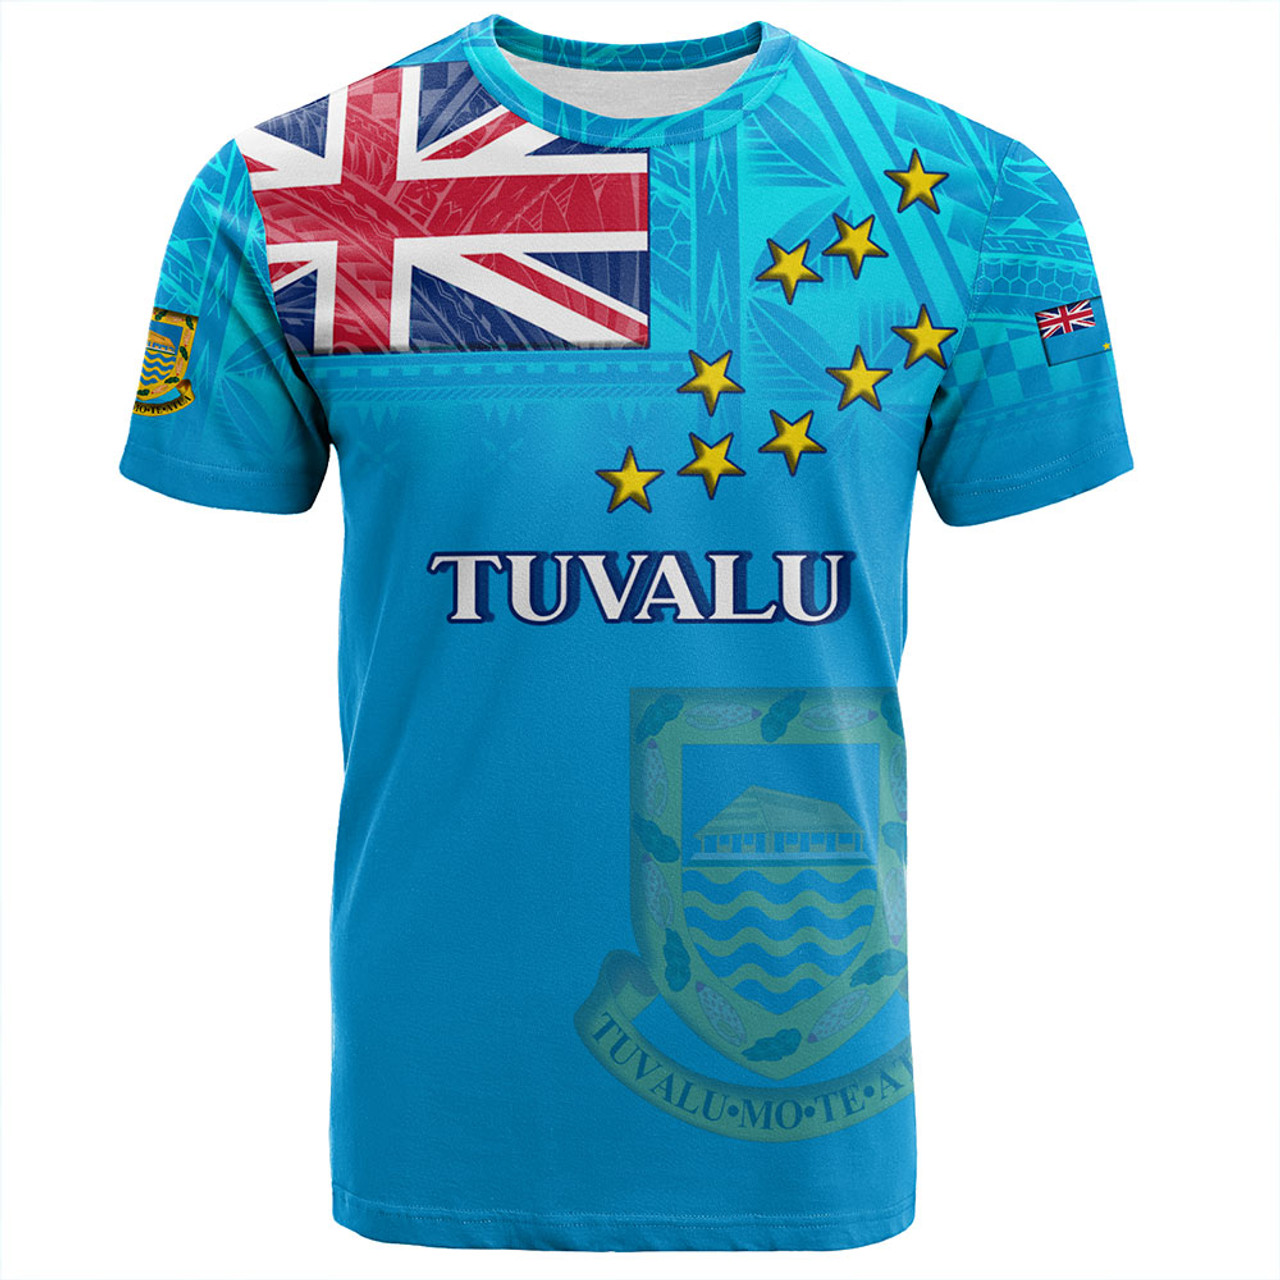 Tuvalu T-Shirt Flag Color With Traditional Patterns